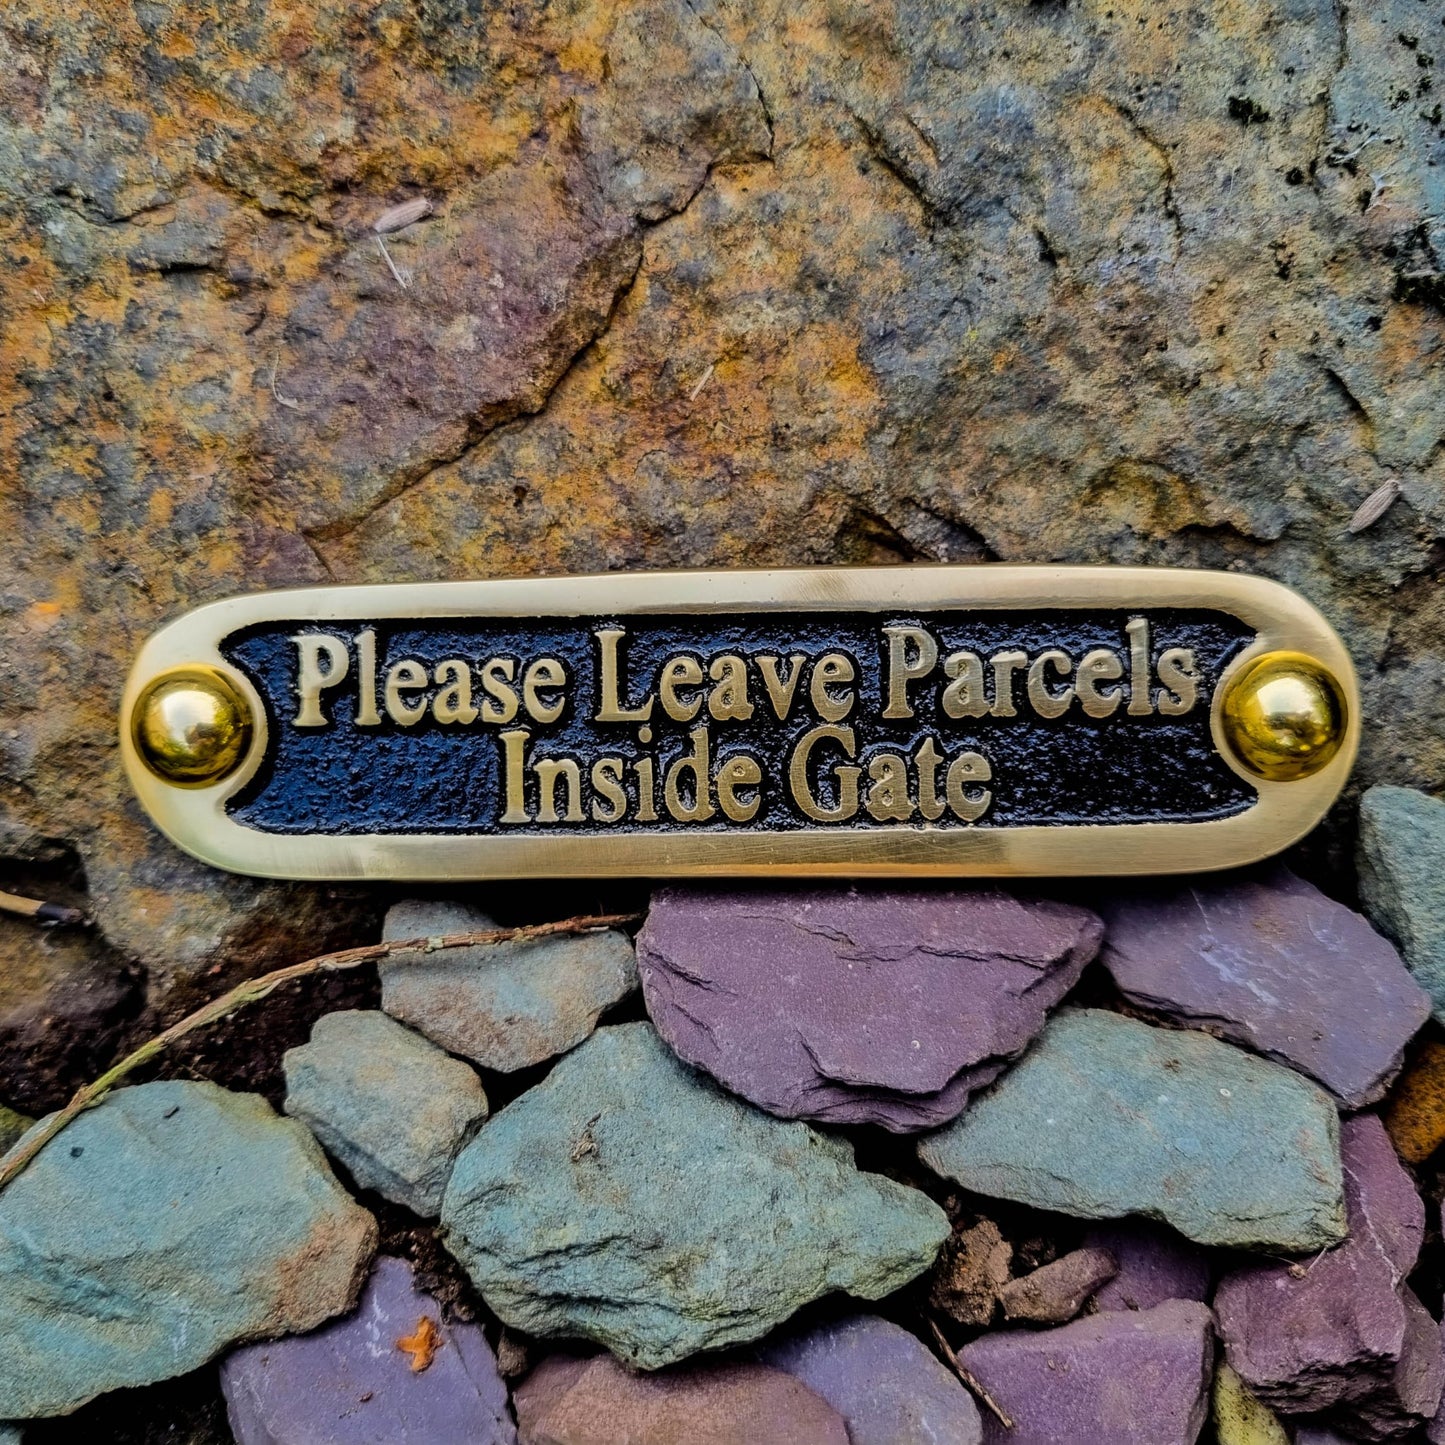 'Please Leave Parcels Inside Gate' Sign - The Metal Foundry